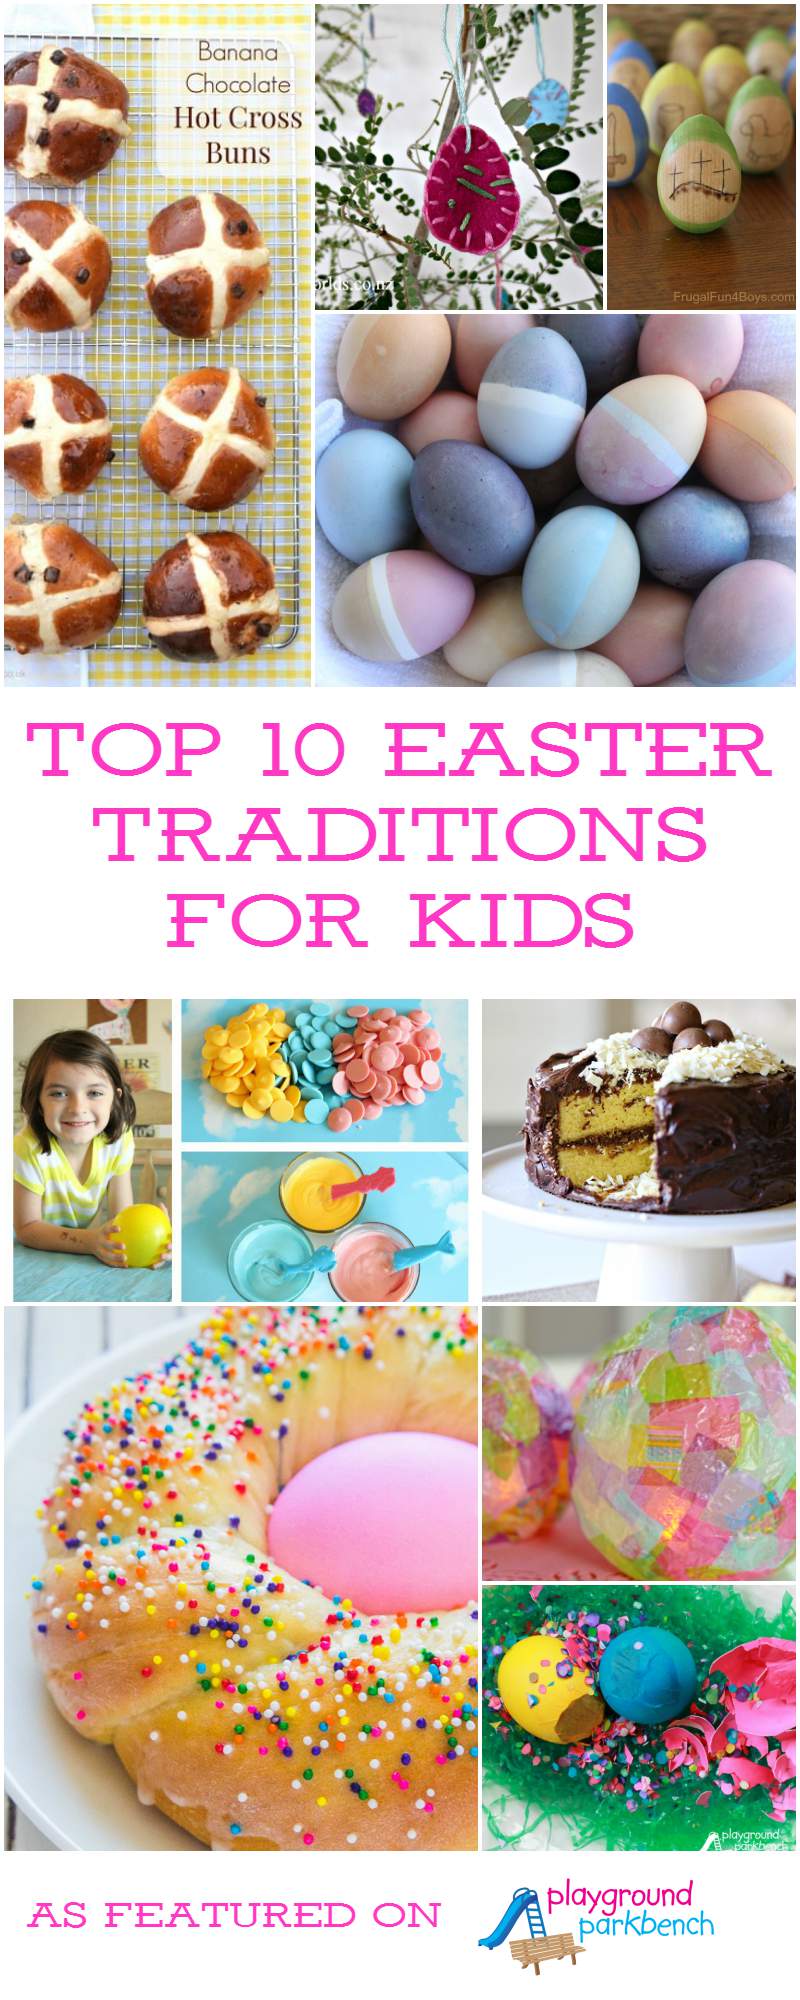 Celebrate Easter Sunday with these fun, festive, unique and creative Easter traditions for kids from across the country and around the world! Featuring recipes, crafts, decorations and more! | Easter | Crafts for Kids | Cooking with Kids | Easter Eggs | Holiday | Easter Traditions | Resurrection |